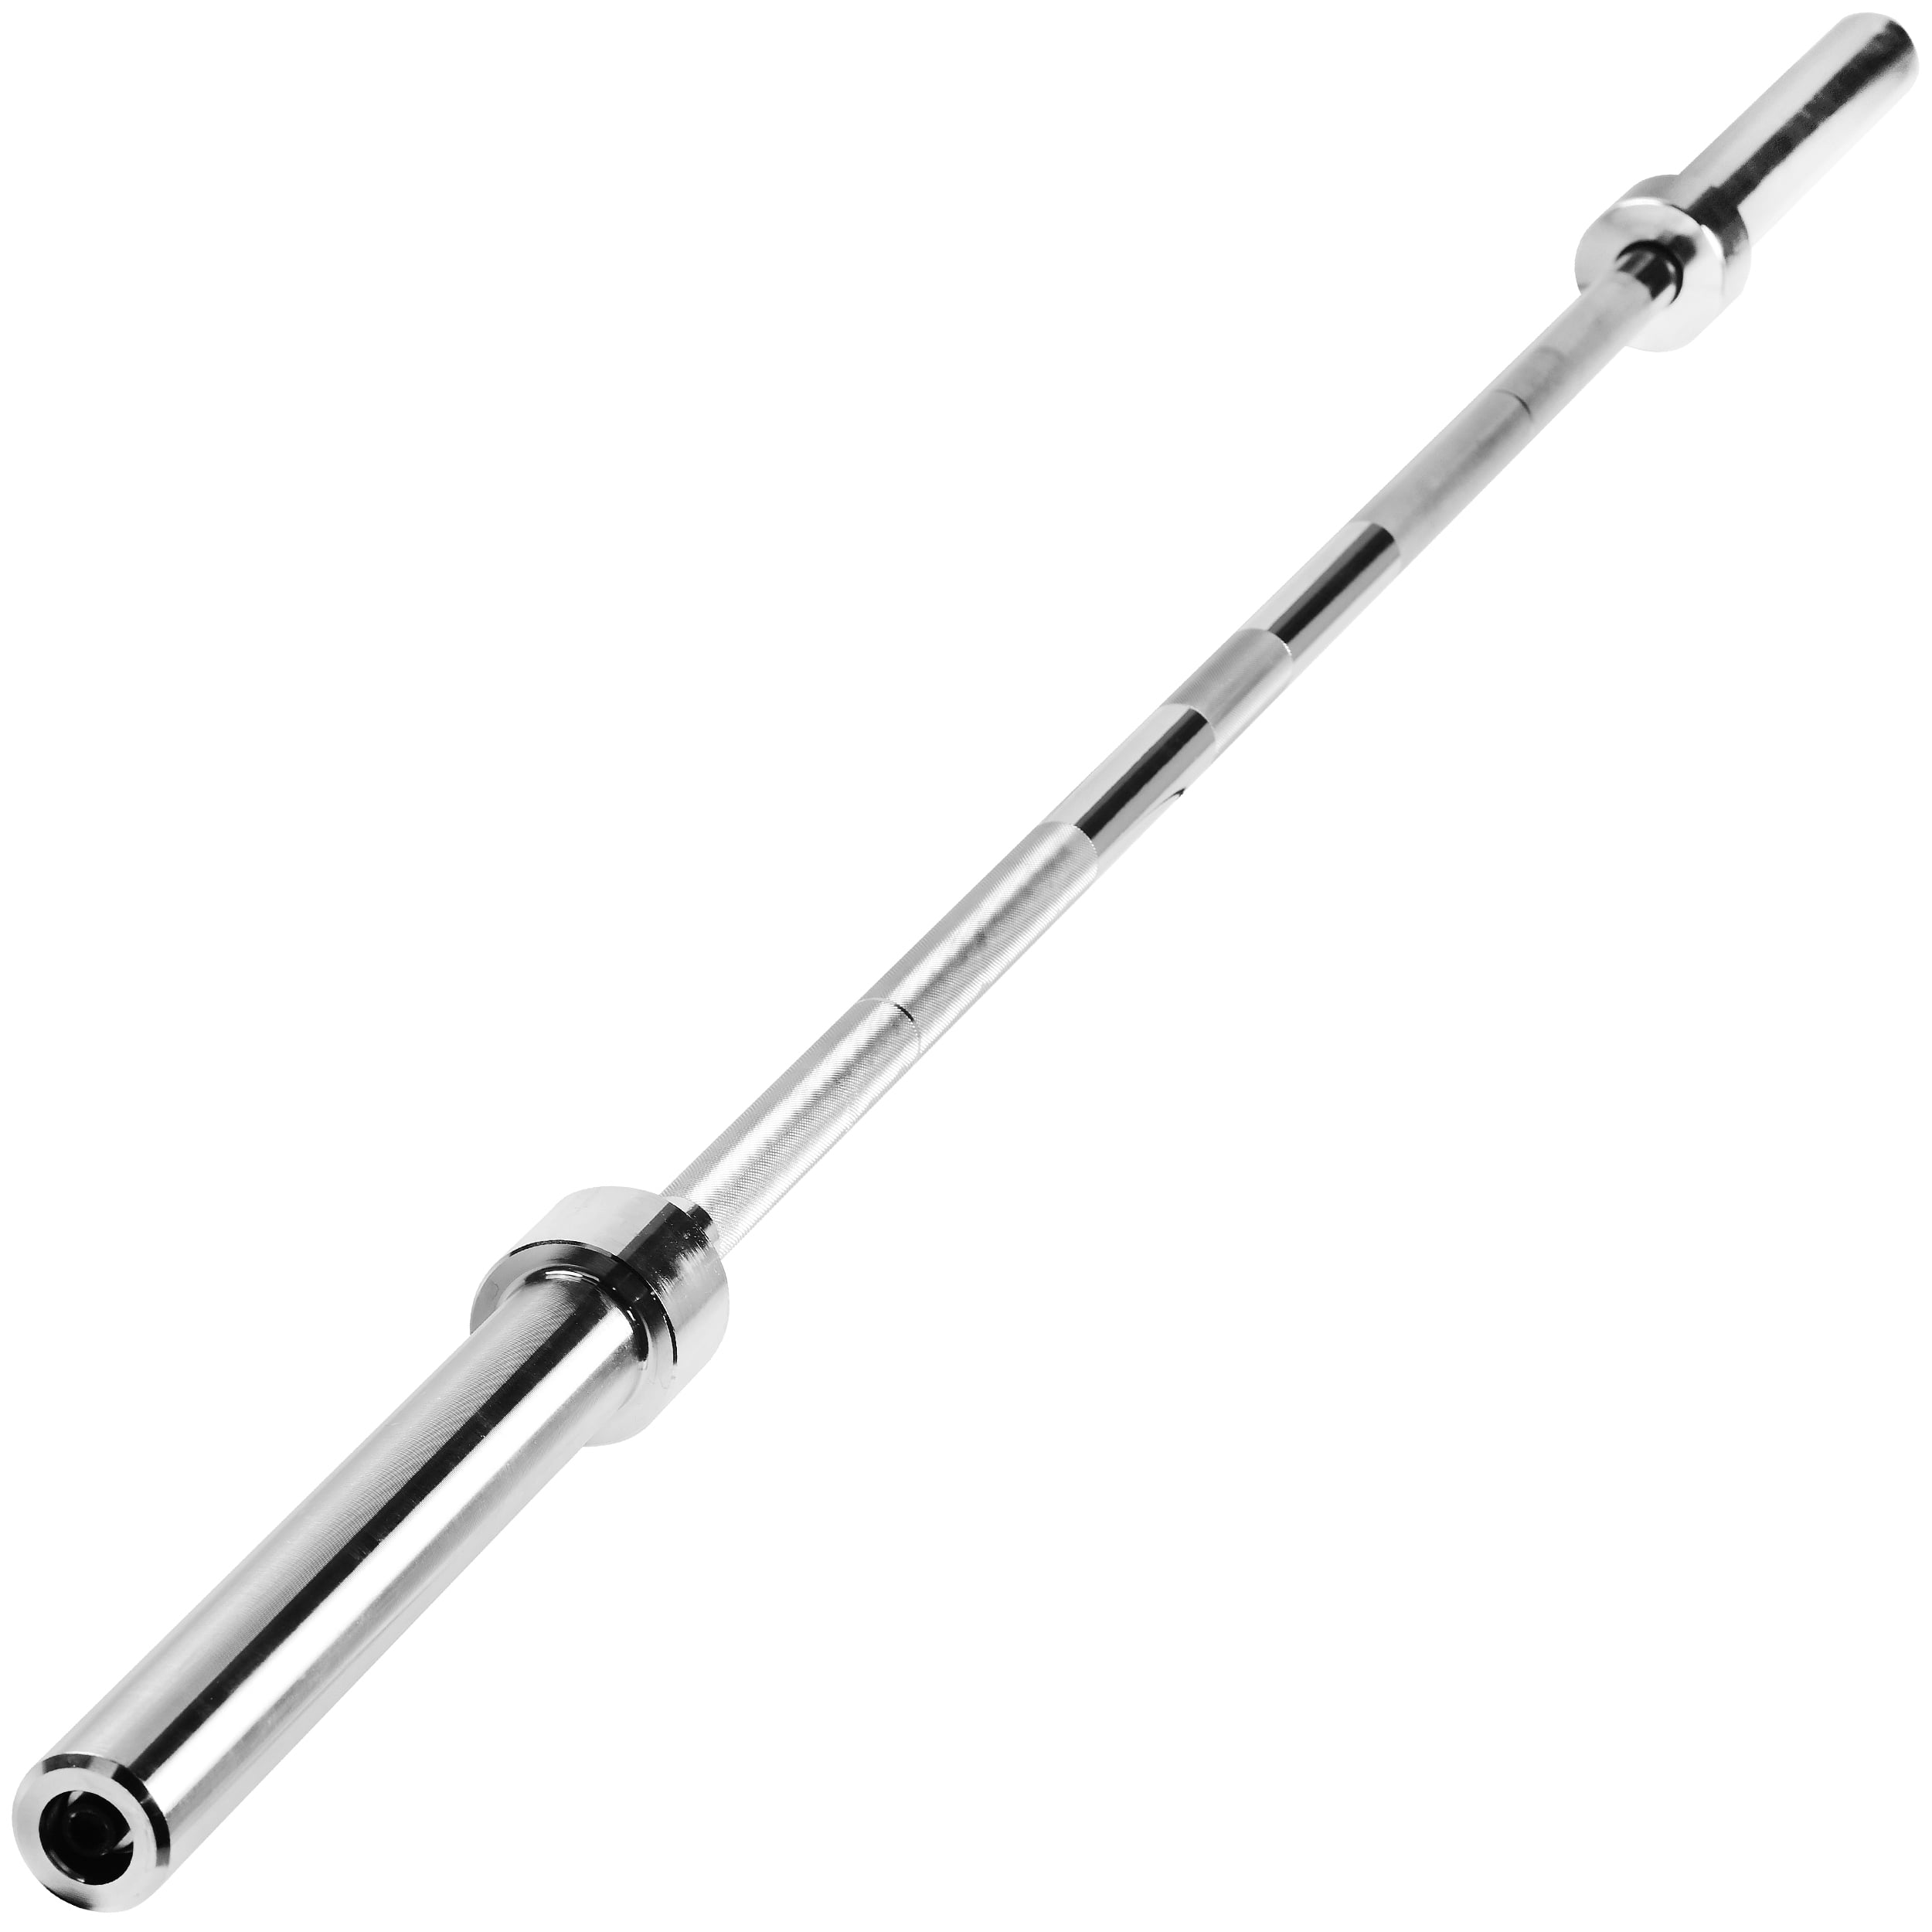 Details about   FITNESS New 700 Pound Olympic Barbell 7 Ft Bar 45 lbs FAST SHIPPING 